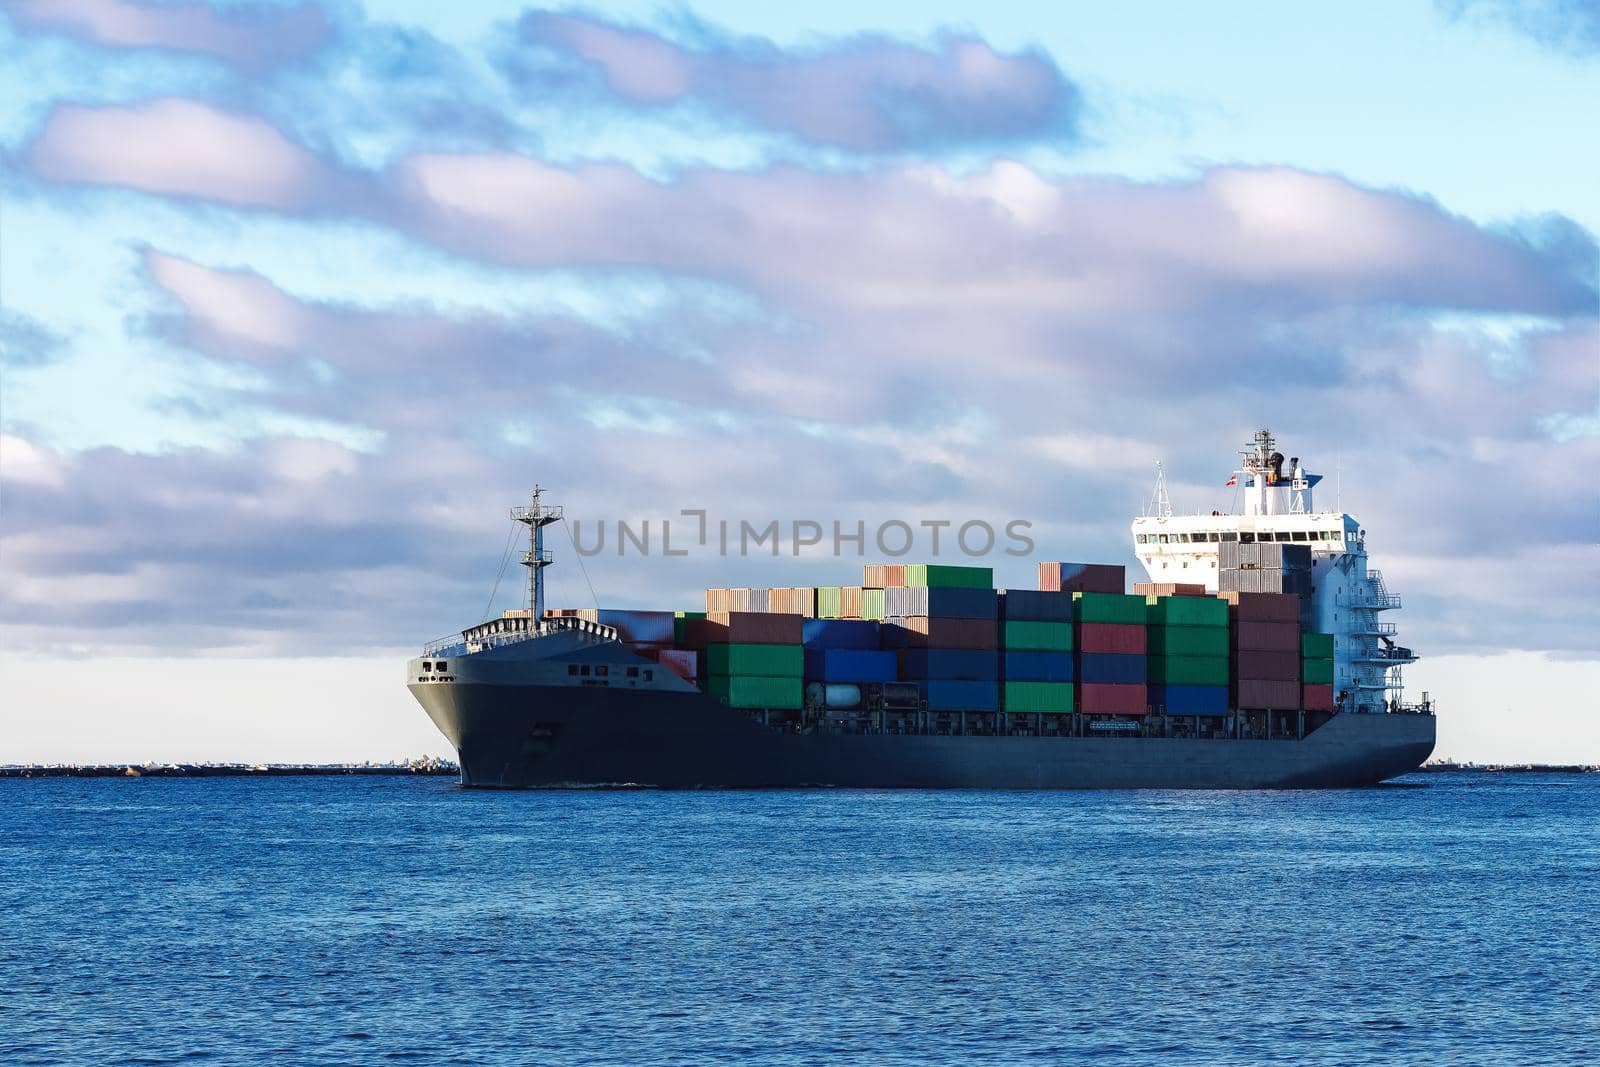 Modern grey container ship moving in still water